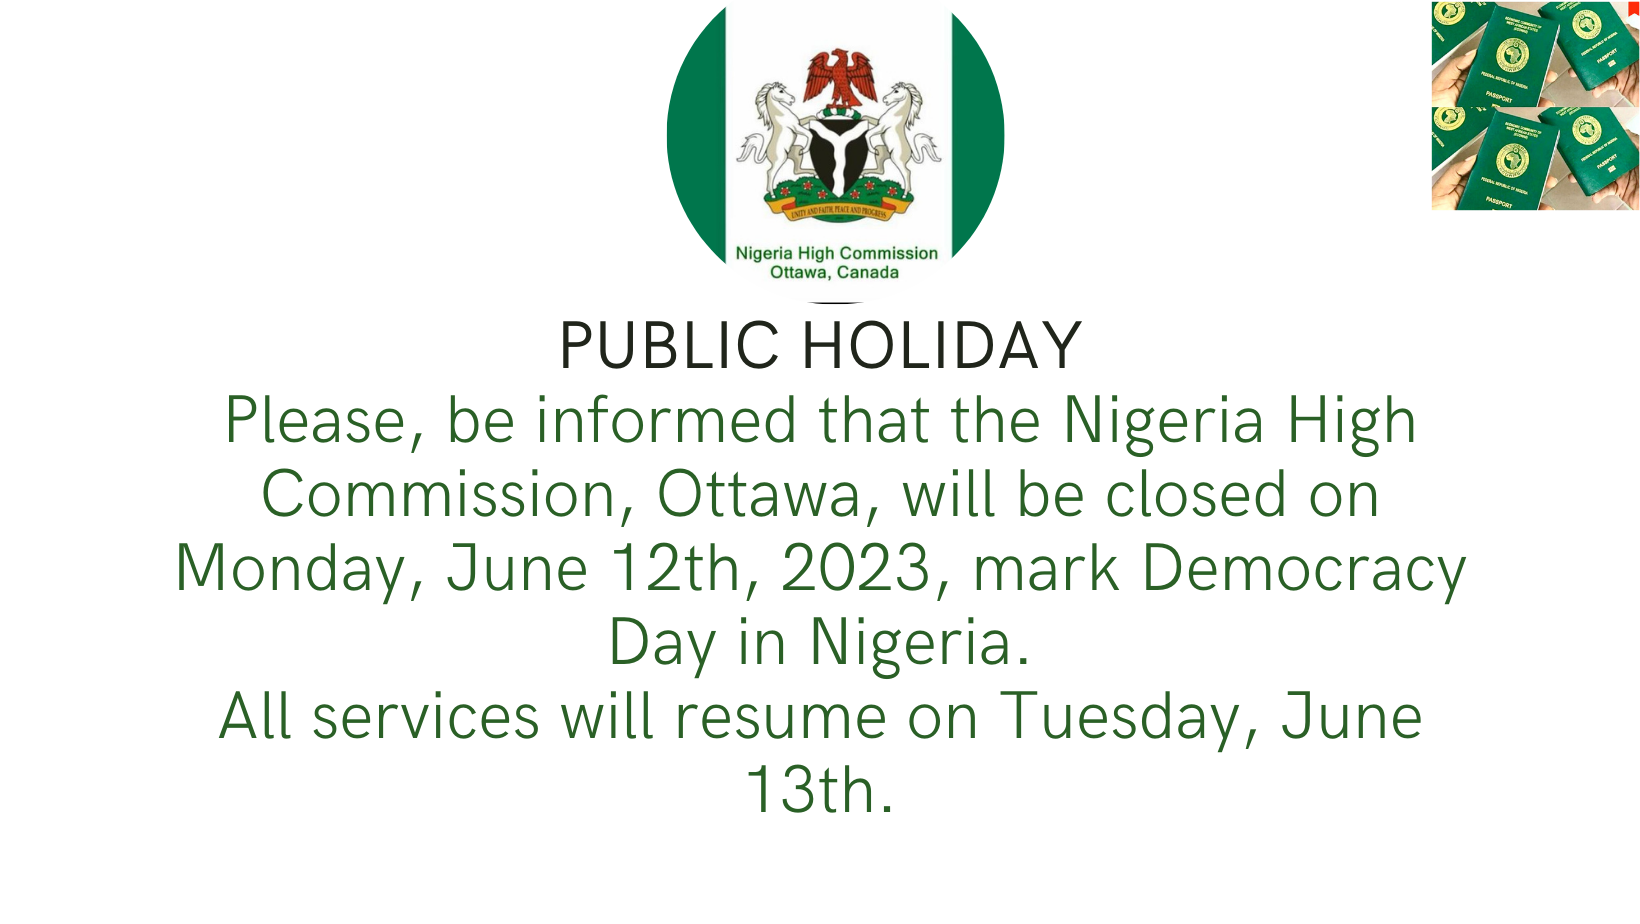 NOTICE OF A PUBLIC HOLIDAY